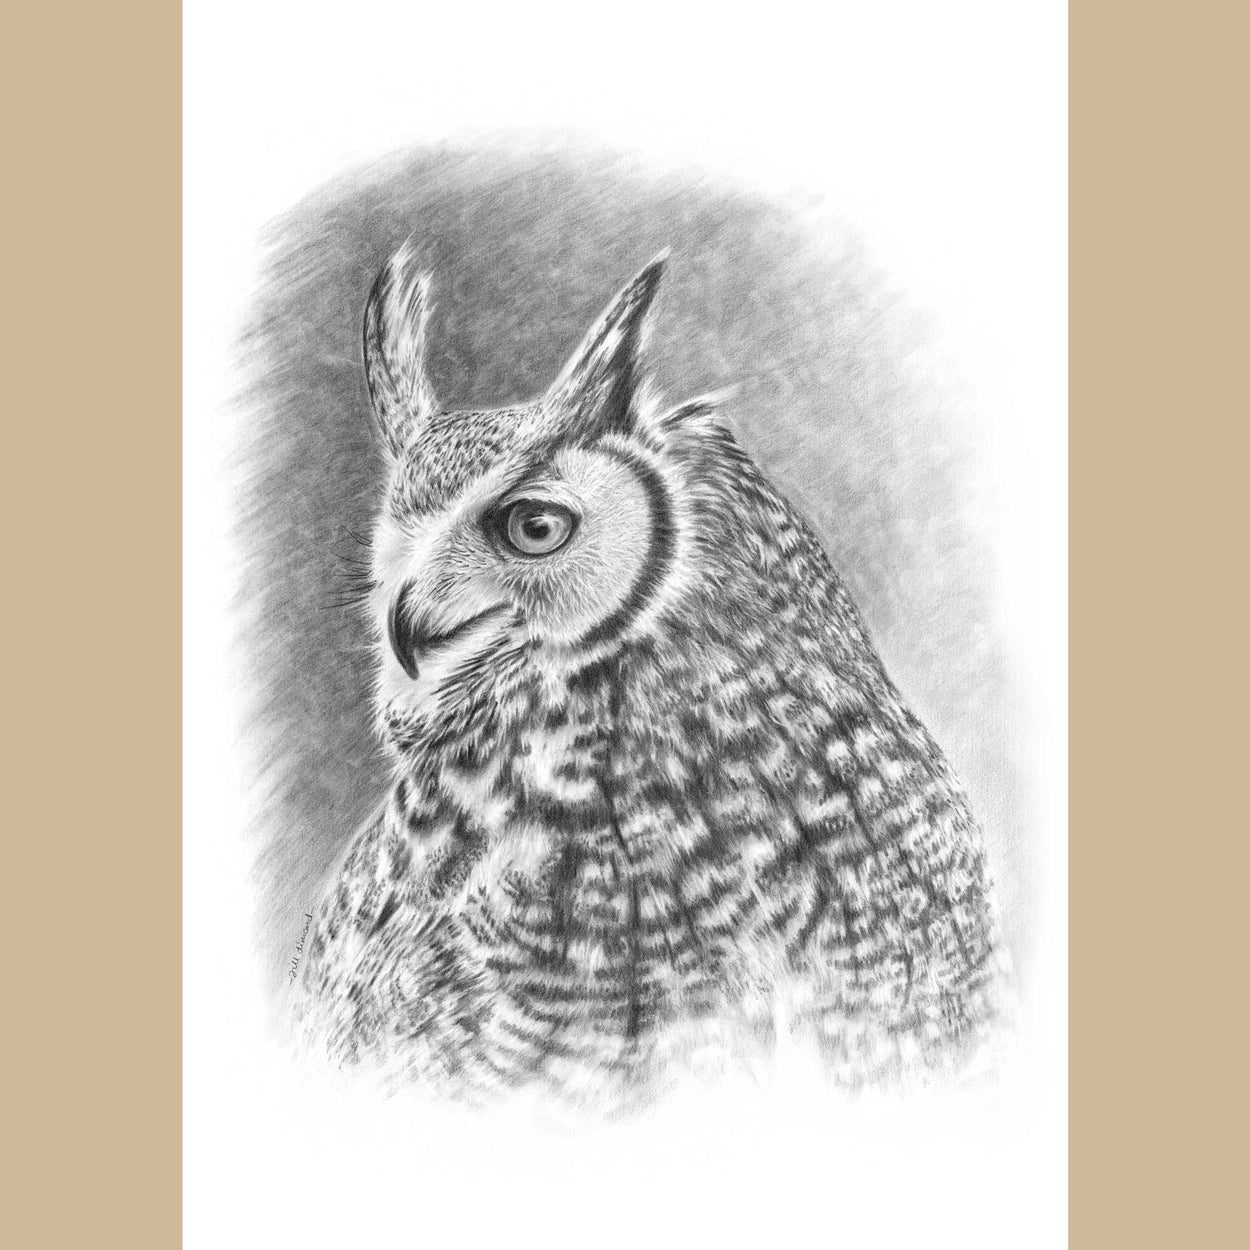 Black and white drawing of a great horned owl looking to the left